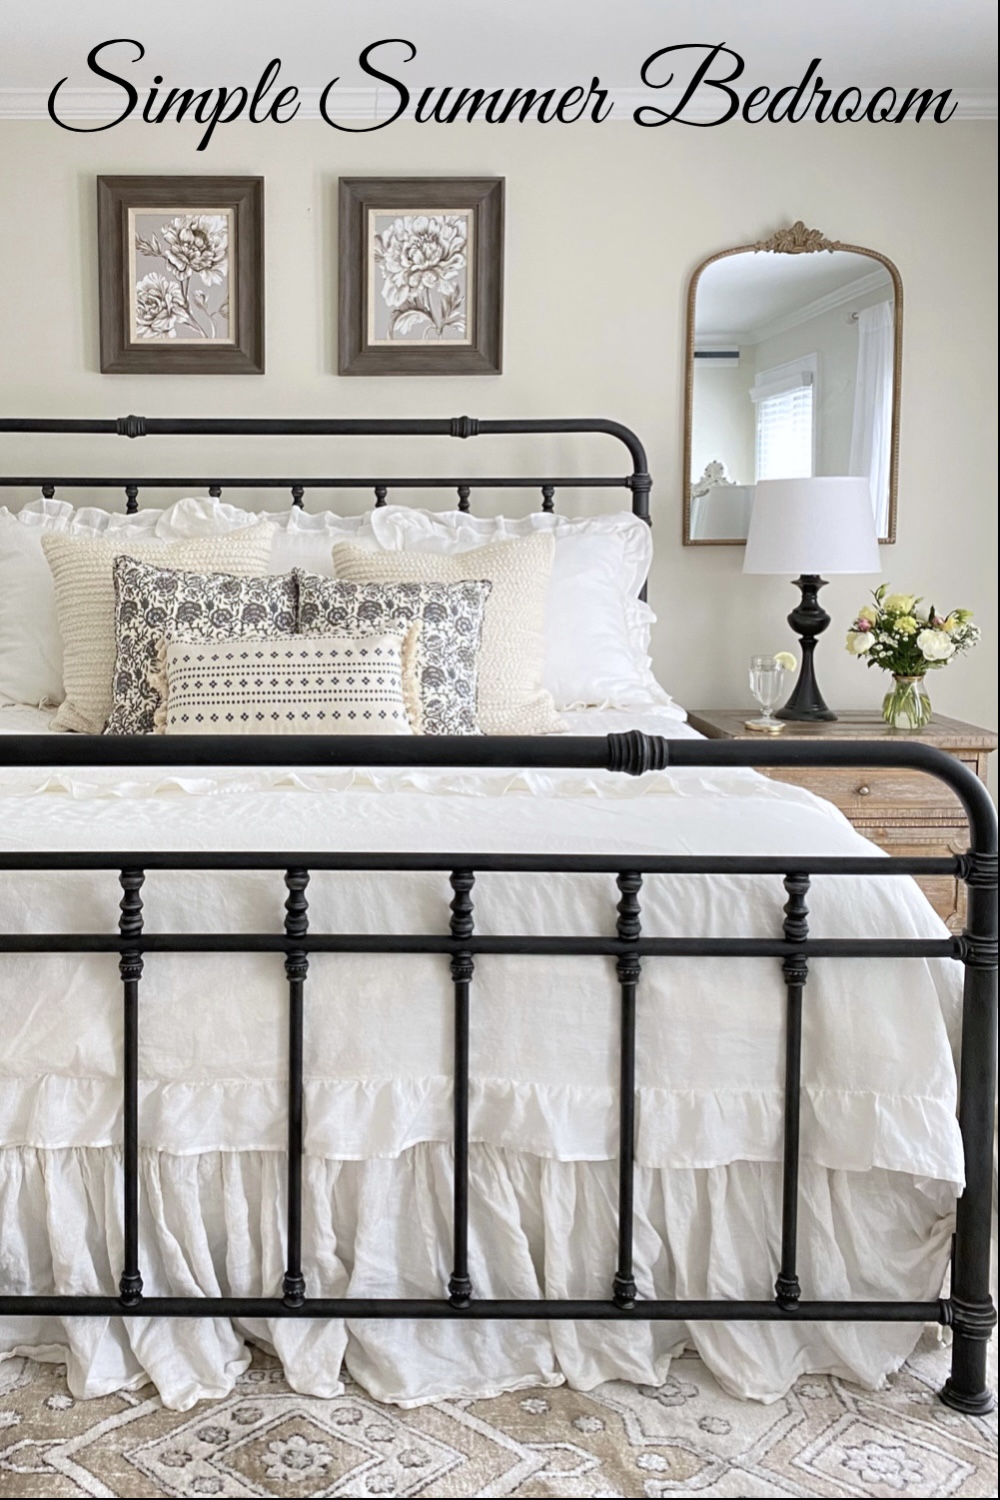 Pinterest Pin for simple summer bedroom.